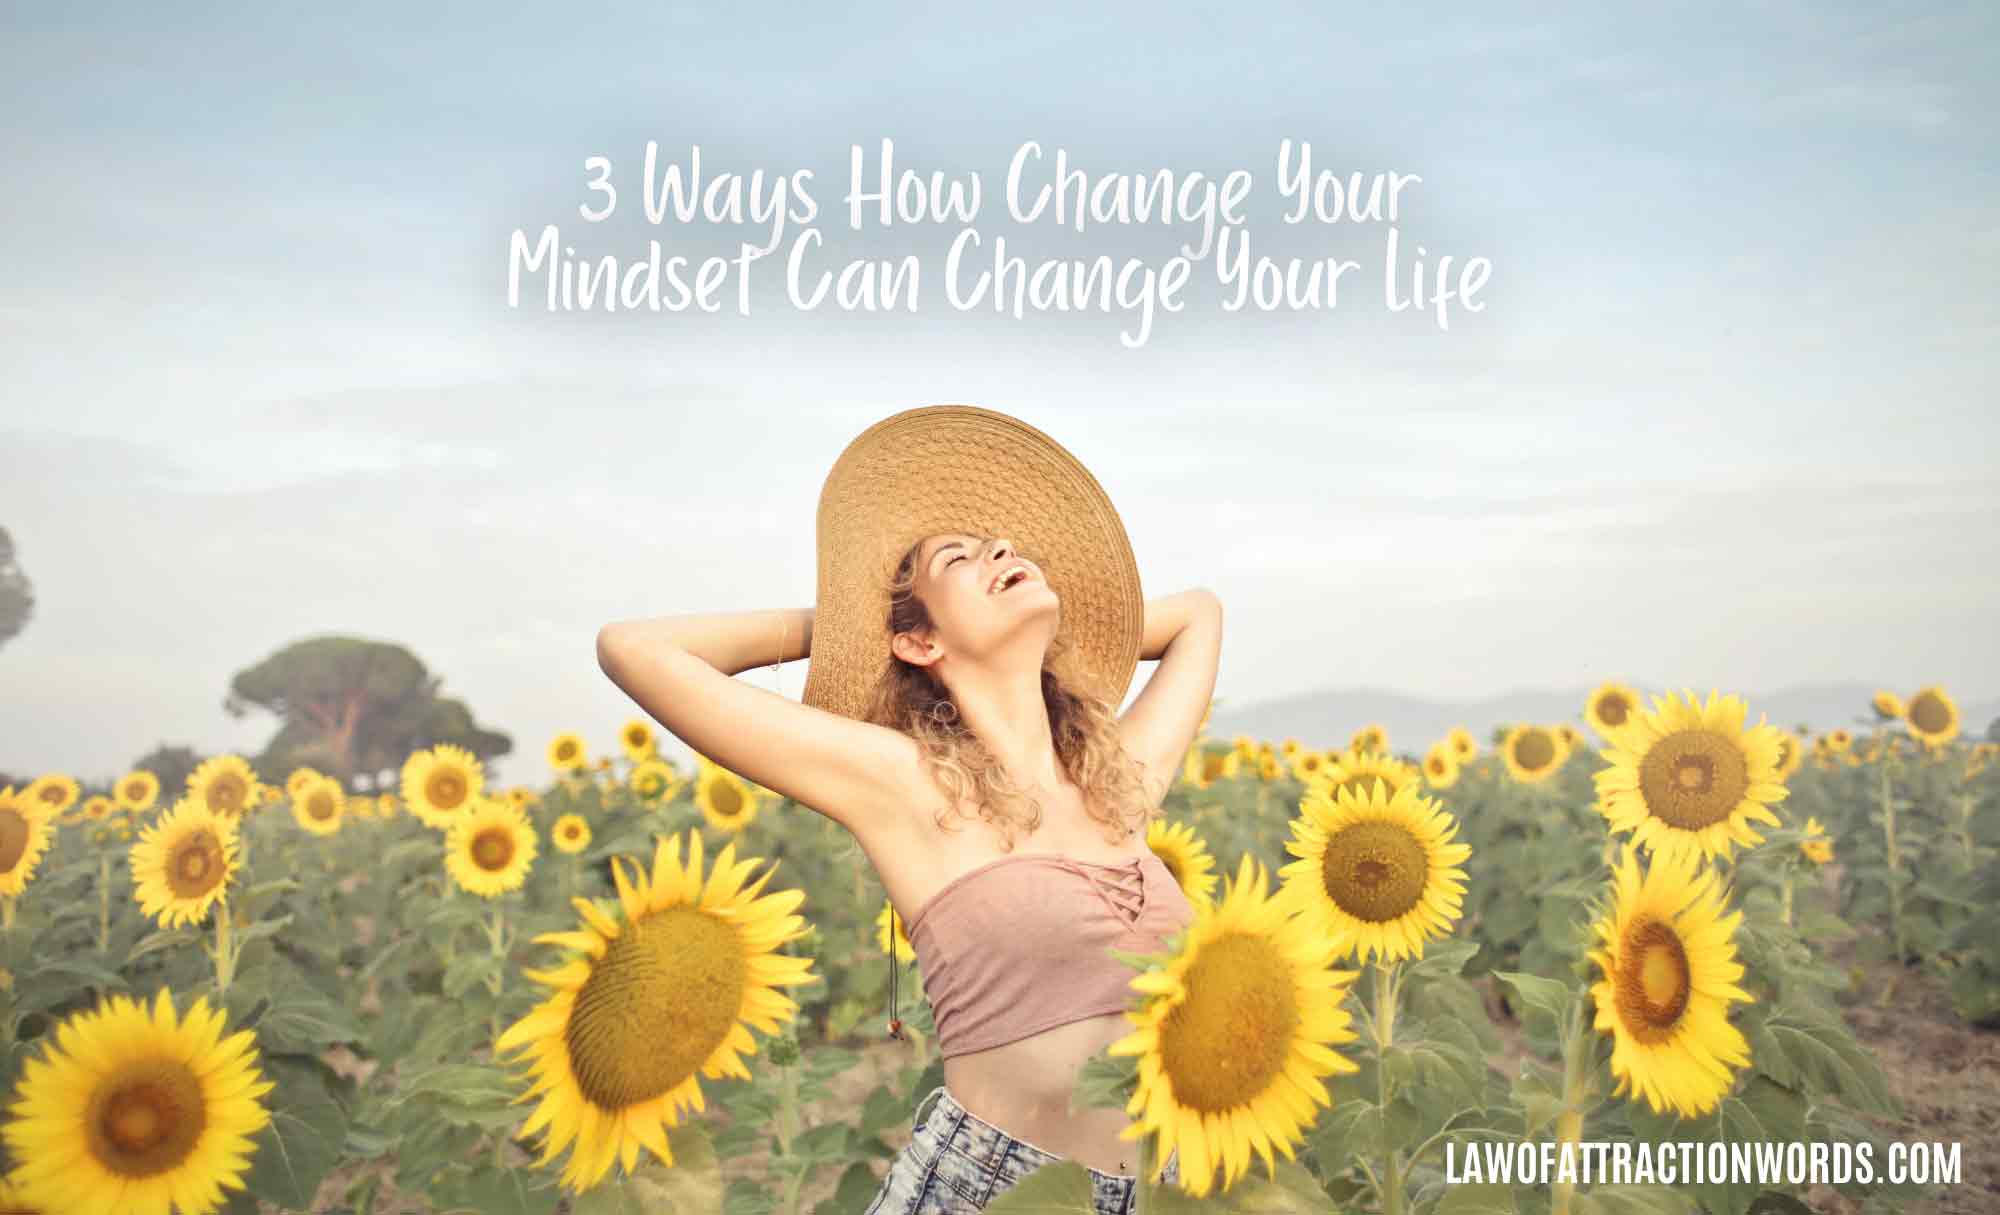 3 Ways How Change Your Mindset Can Change Your Life